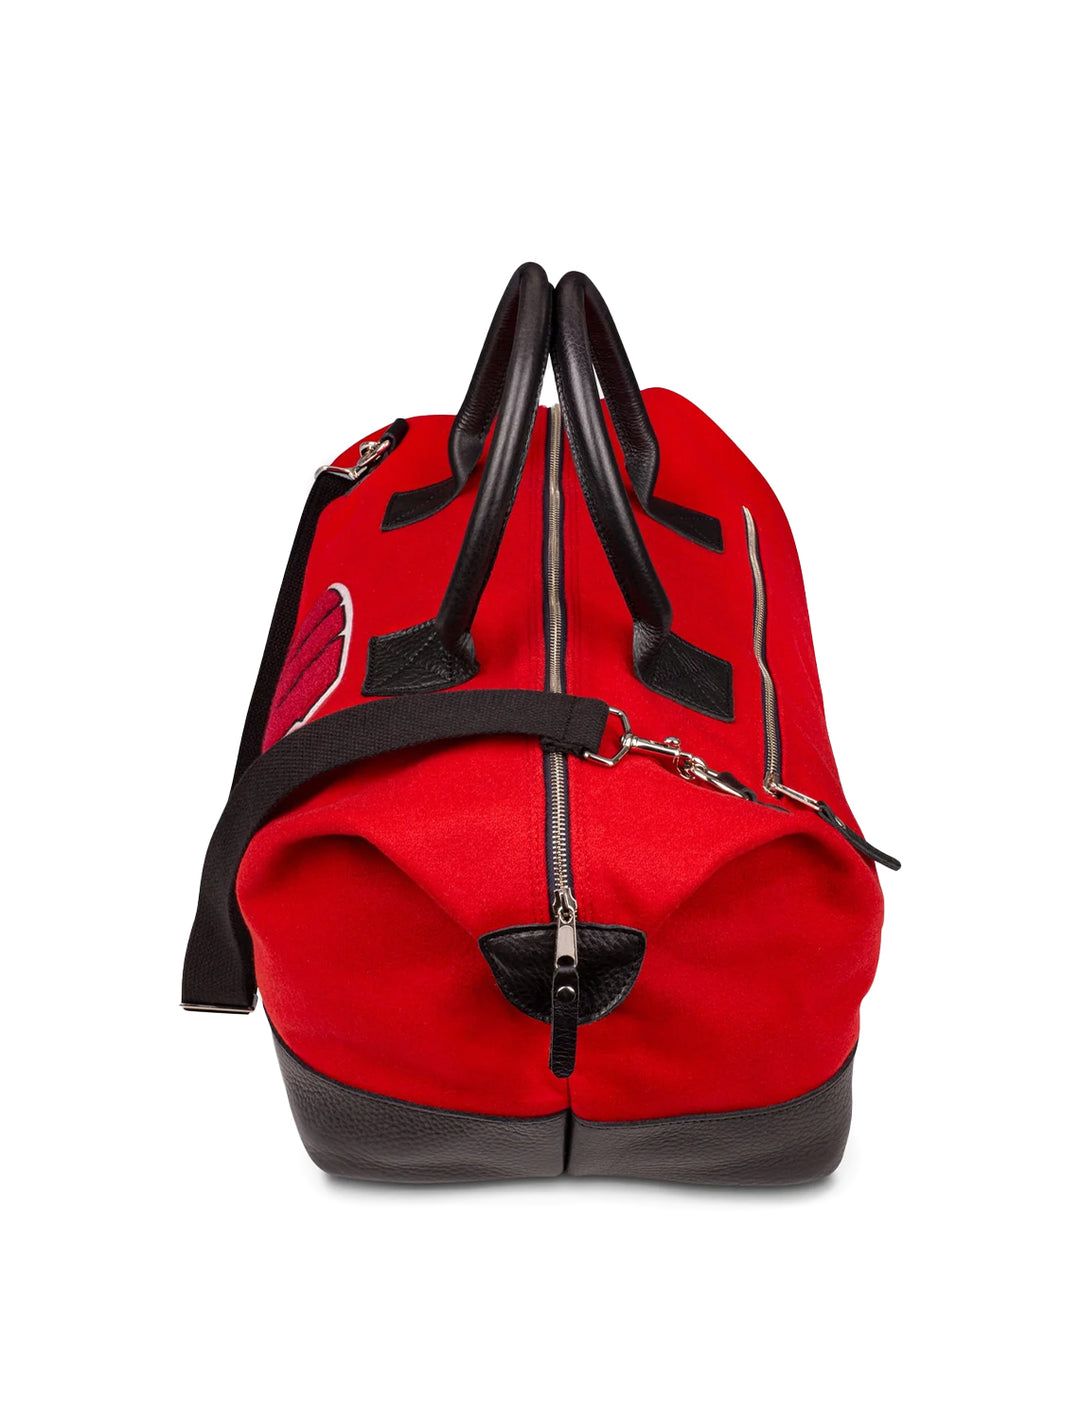 Side angle view of Heritage Gear's wisconsin "w" red weekender.